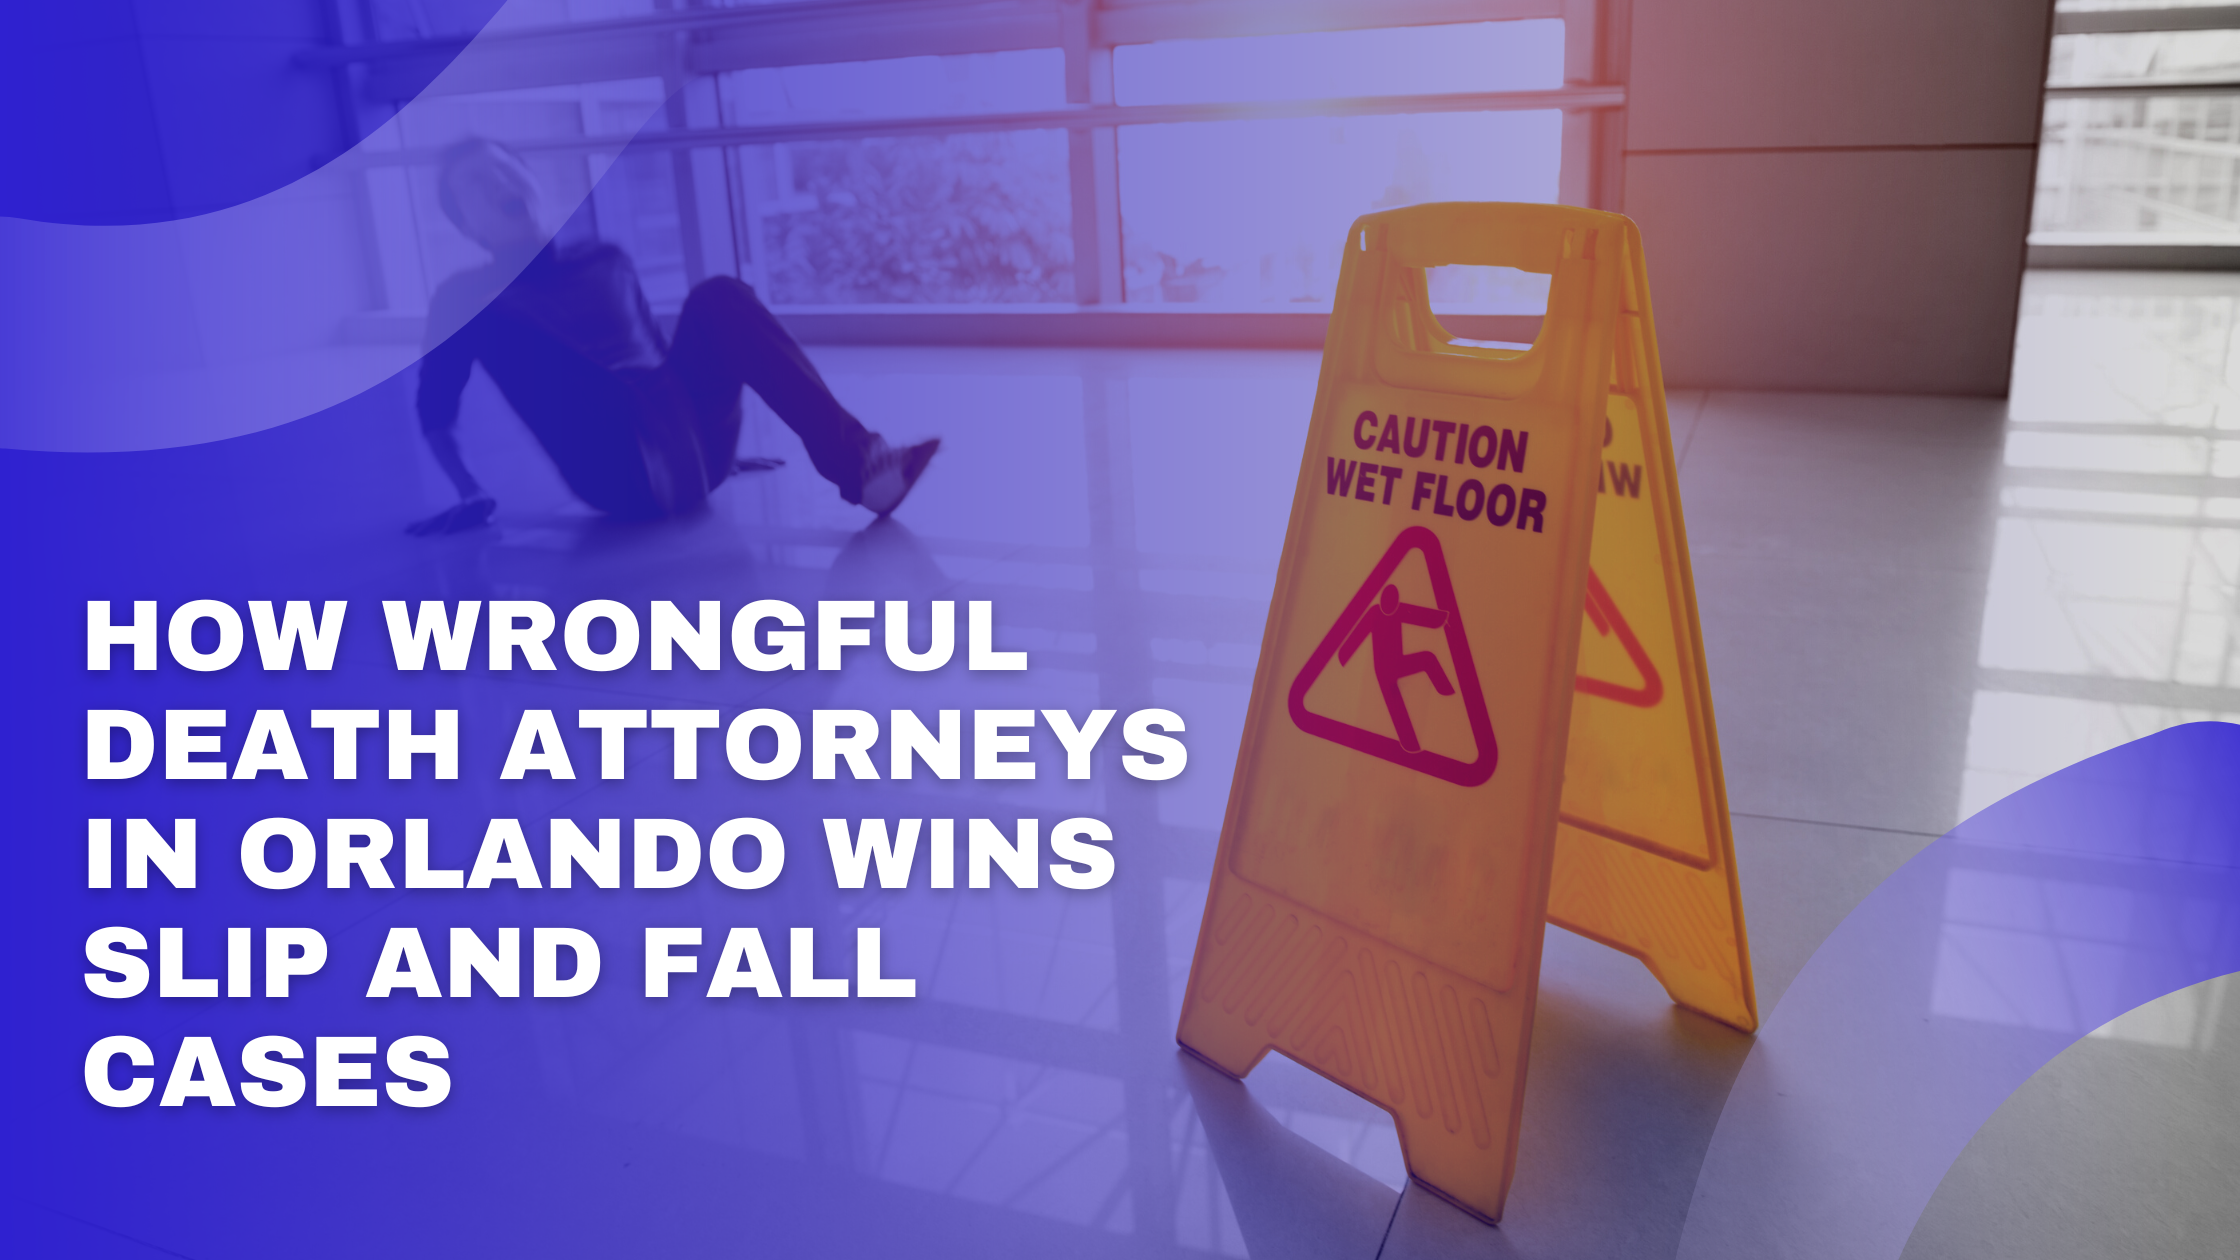 How Wrongful Death Attorneys in Orlando Wins Slip and Fall Cases